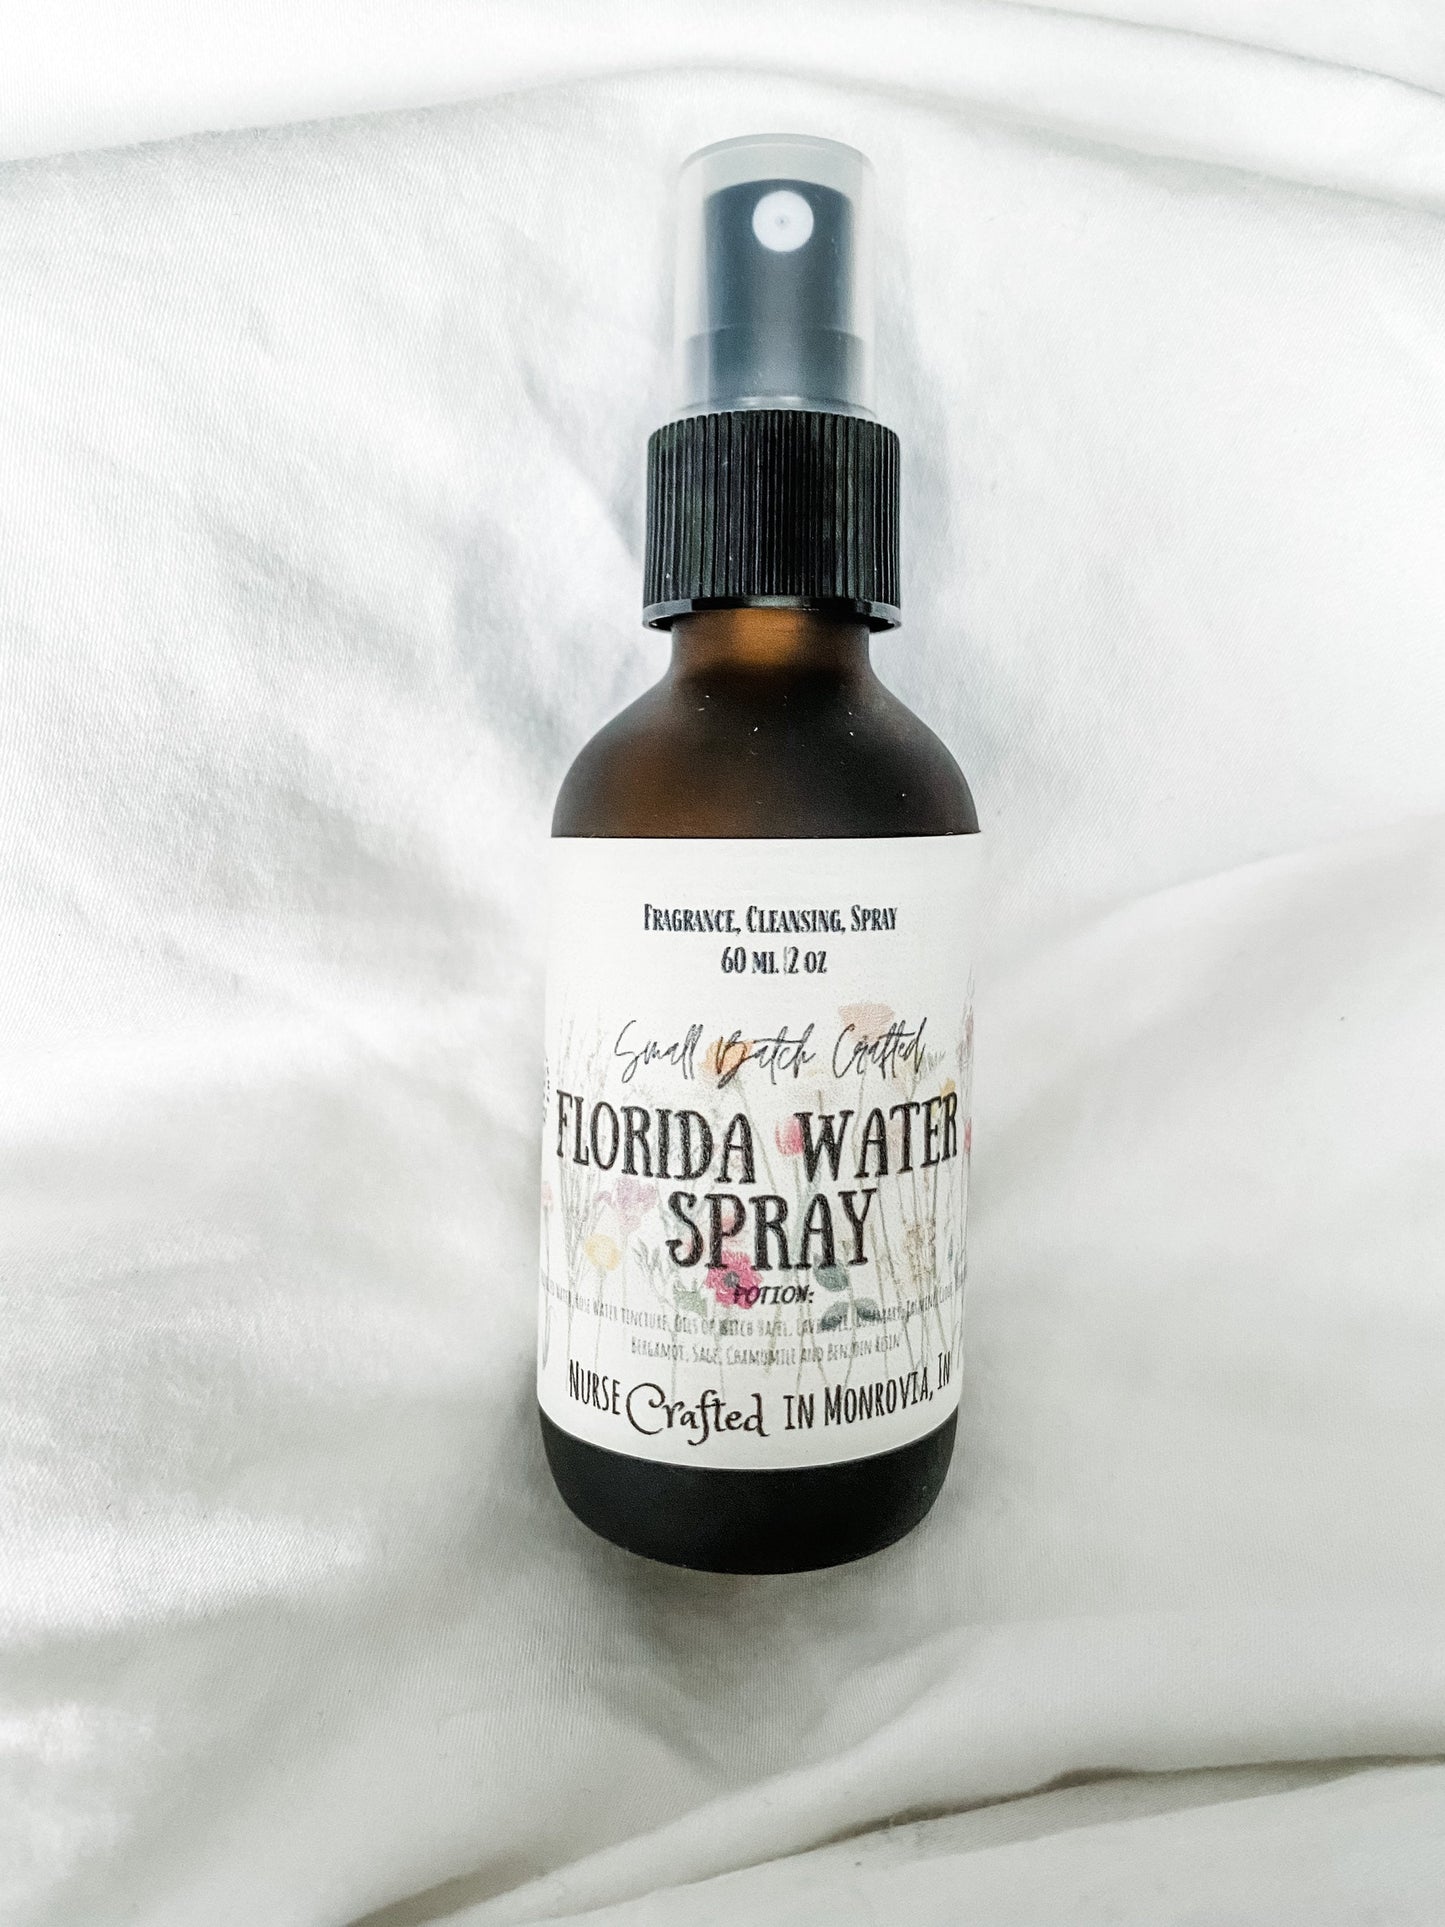 Florida Water concentrate and spray, small batch, ritual cleansing, essential oil, cologne, protection, bad vibe cleanser, room spray